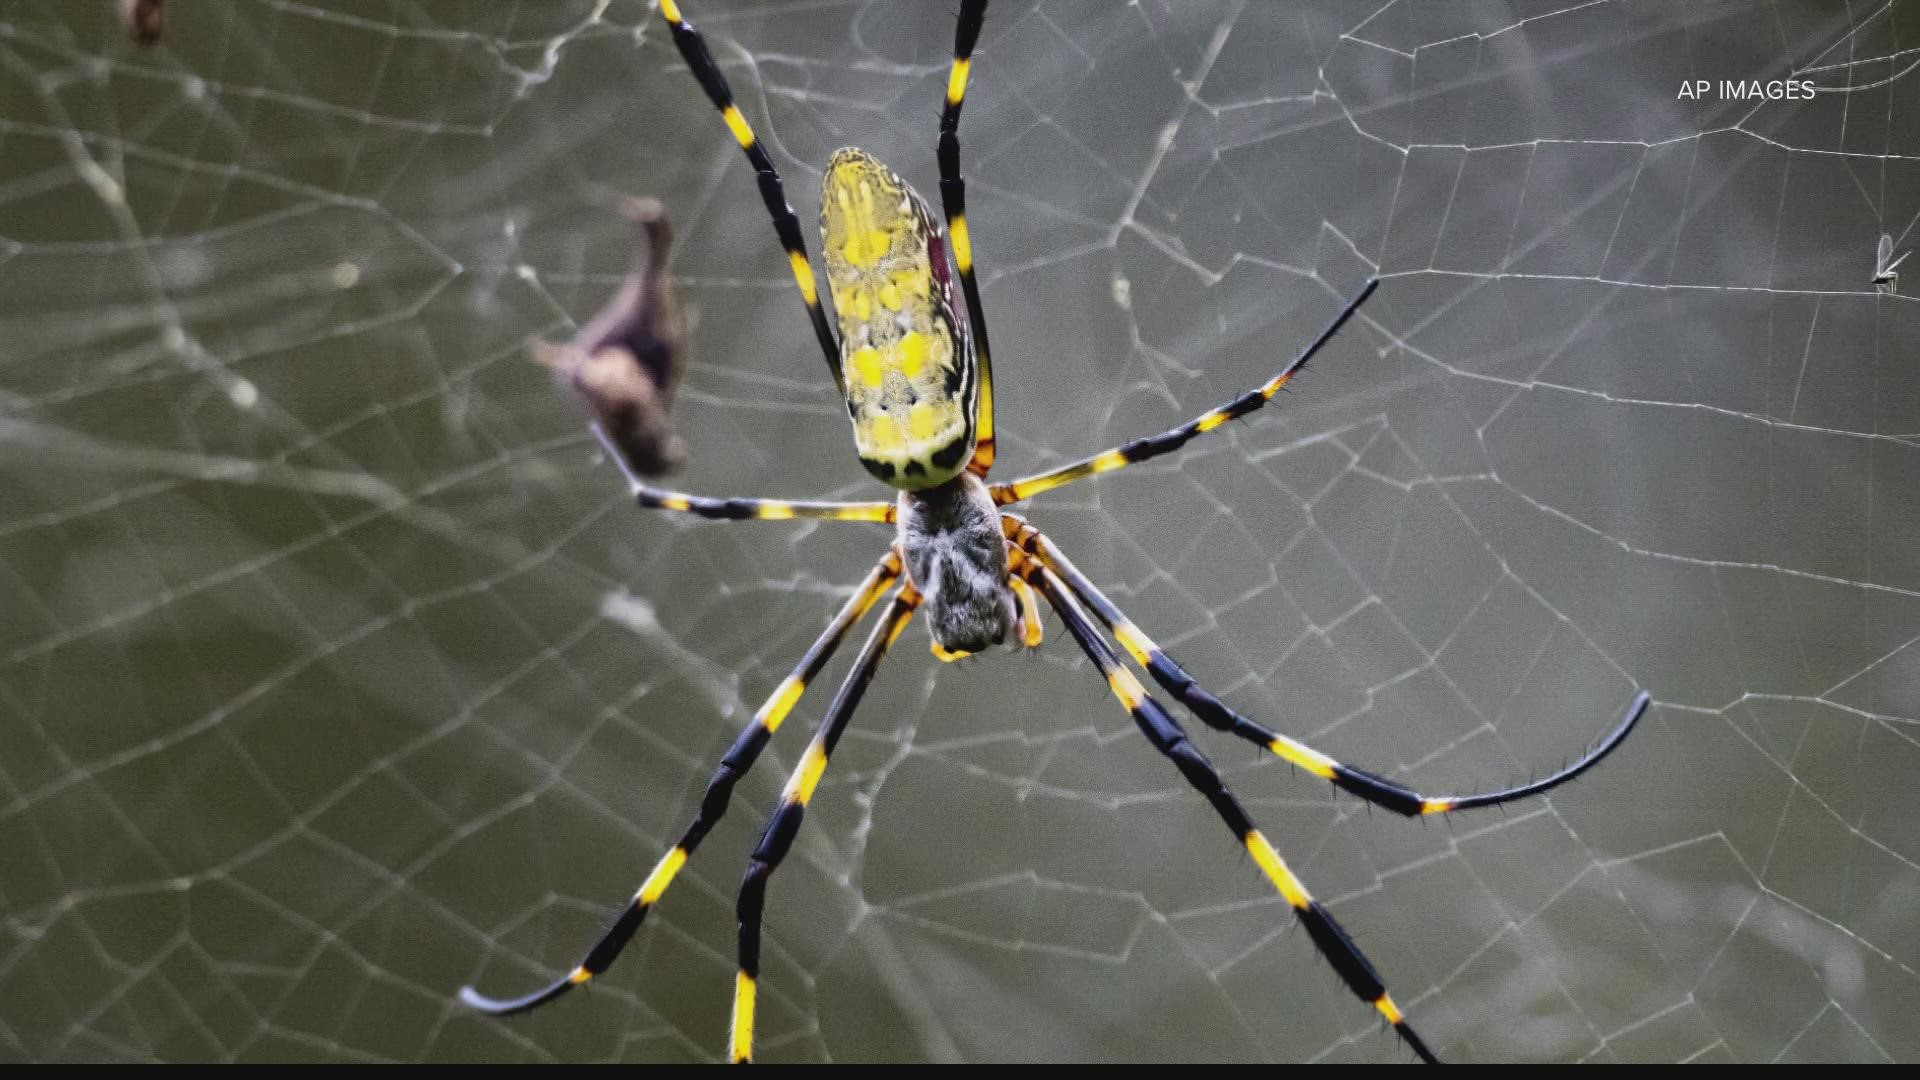 Not to be confused with the banana spider, the Joro was first spotted in Georgia around 2014. The species is headed to Florida by hitching on cars and "ballooning."